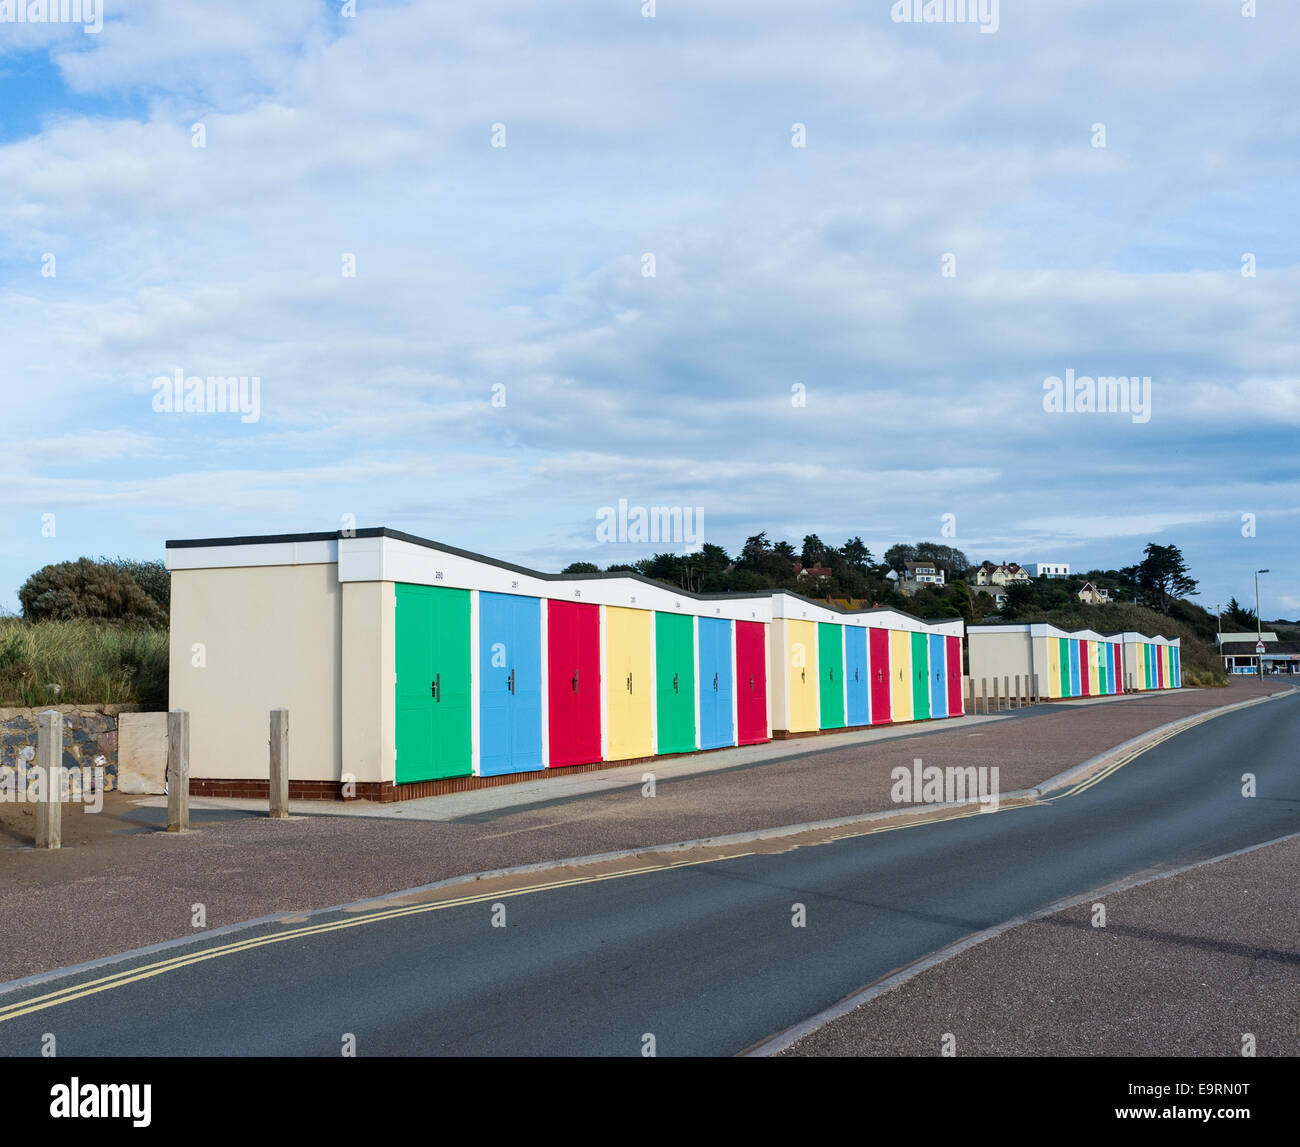 A row of very colorful beach huts on Exmouth sea front. Yellow, red, blue and green. Stock Photo